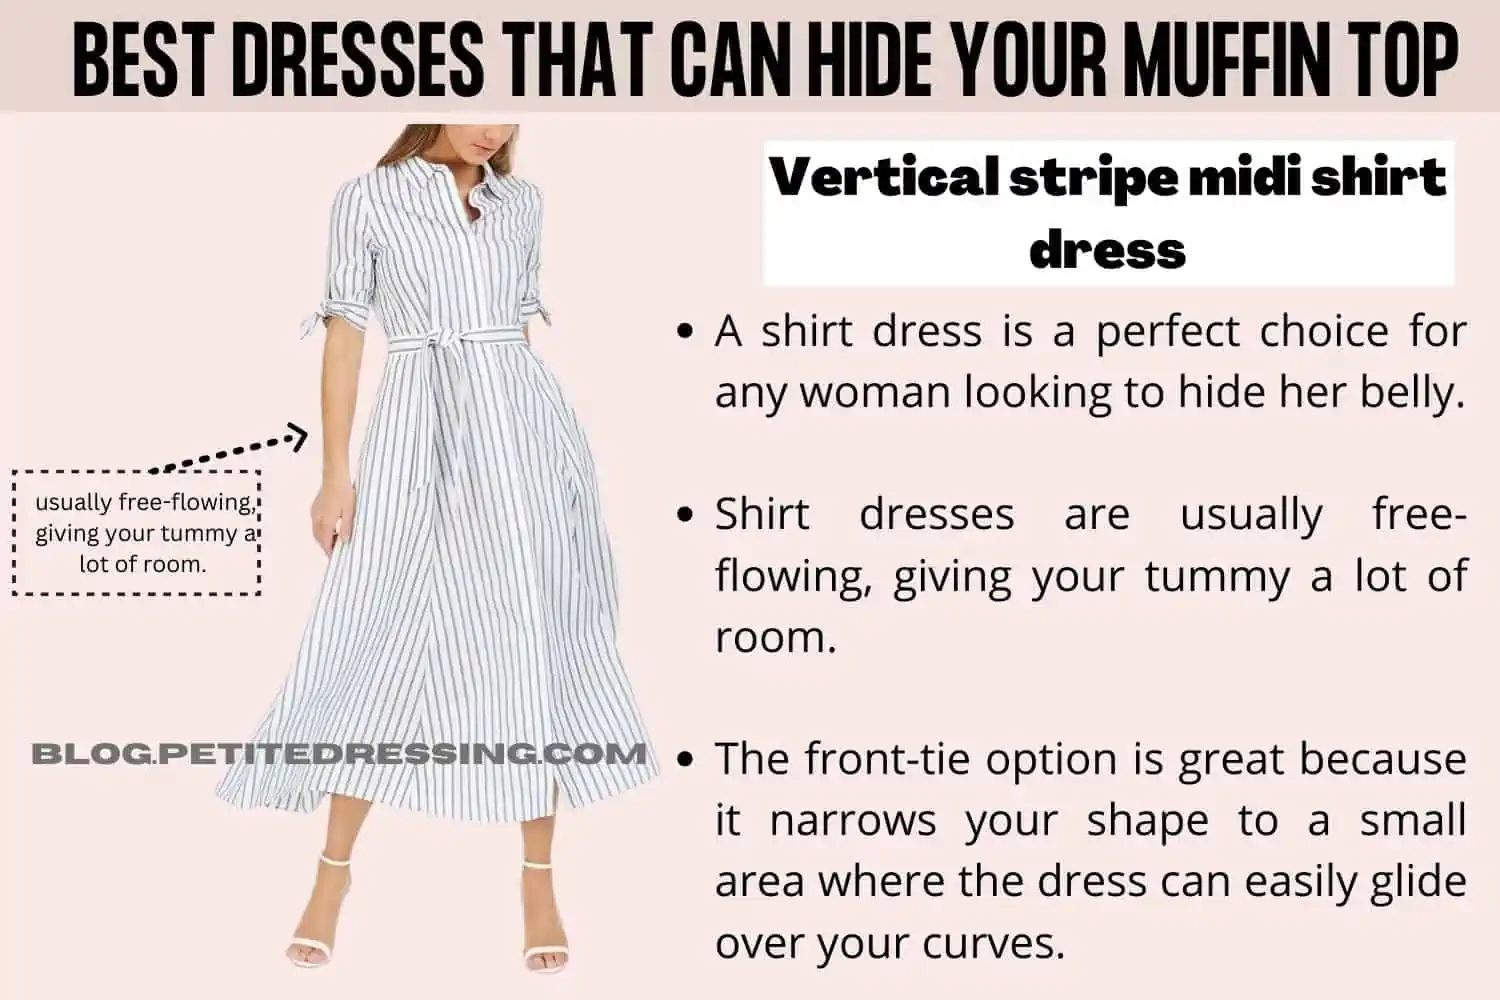 9 Types of Dresses that can Hide a Muffin Top - Petite Dressing